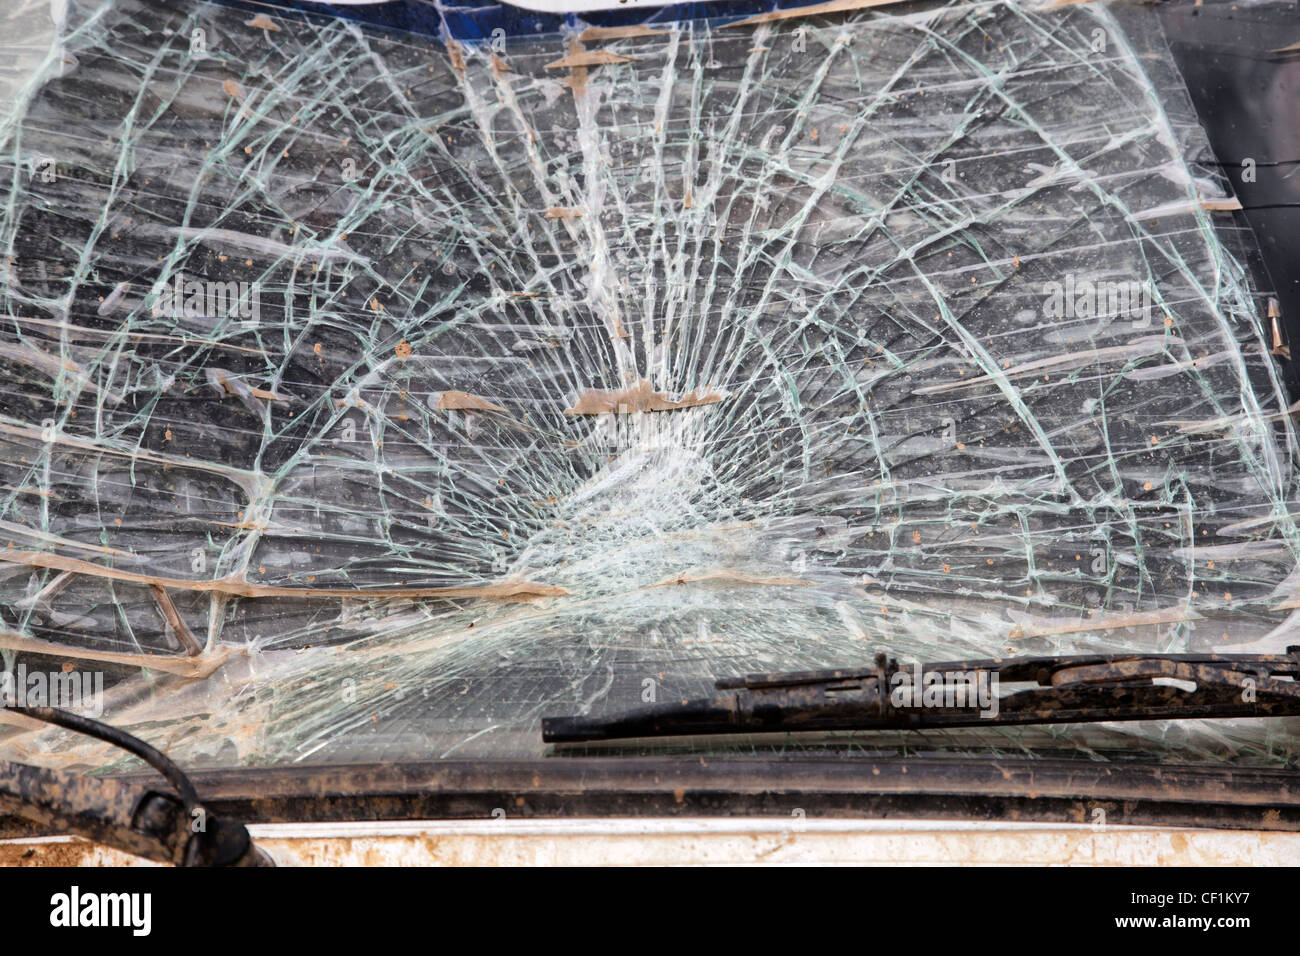 Smashed windshield of rally car Stock Photo